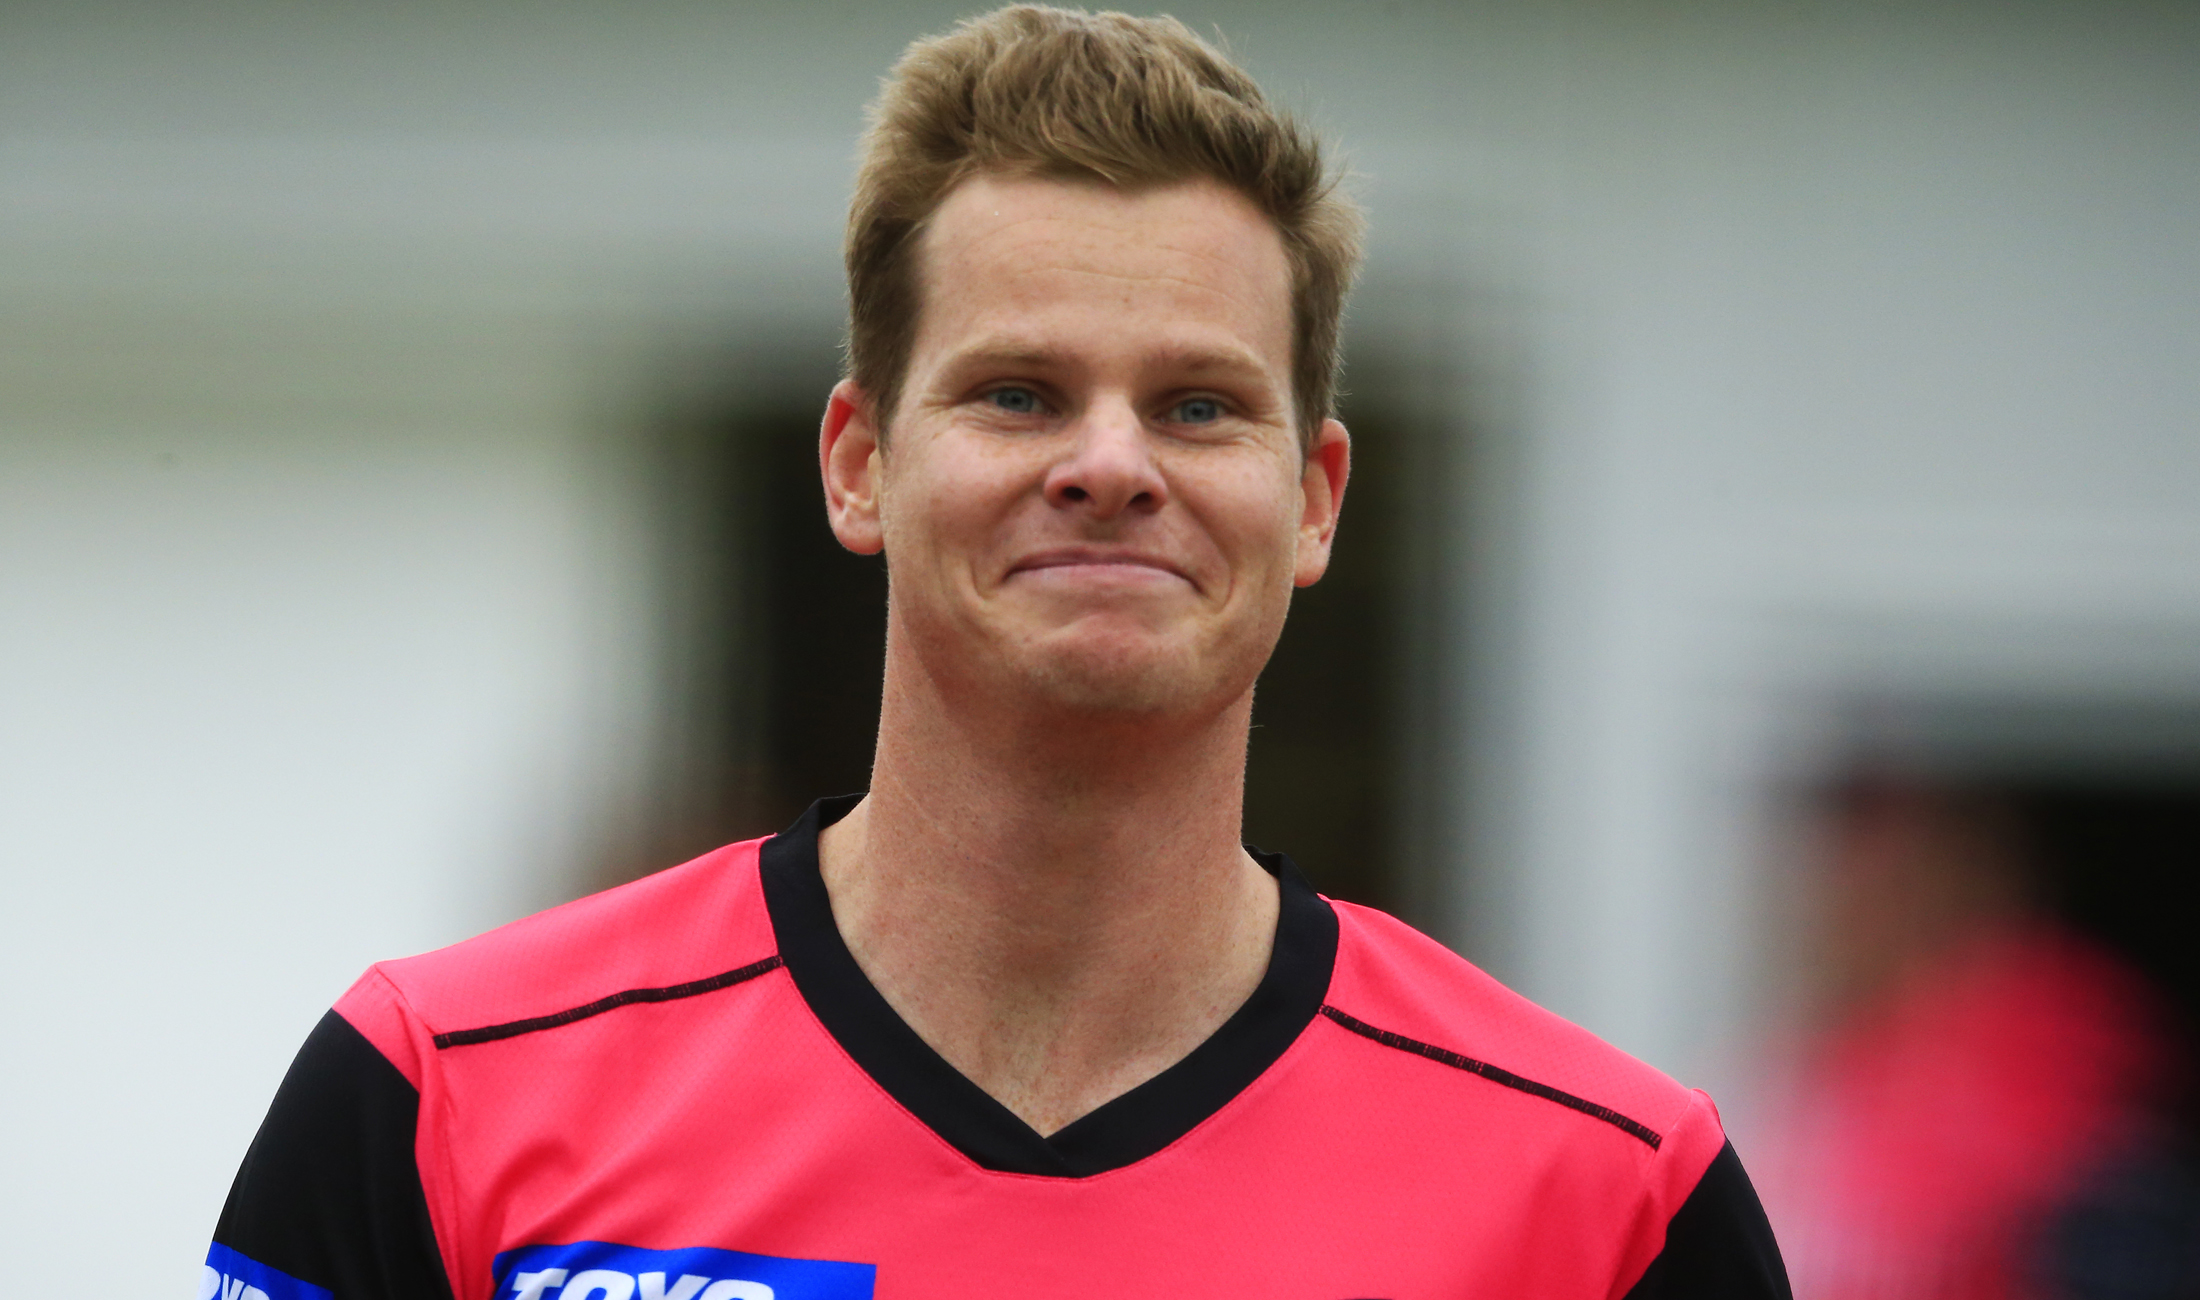 The Sydney Sixers have announced the signing of Australia star Steve Smith for the 2019-20 Big Bash League season.